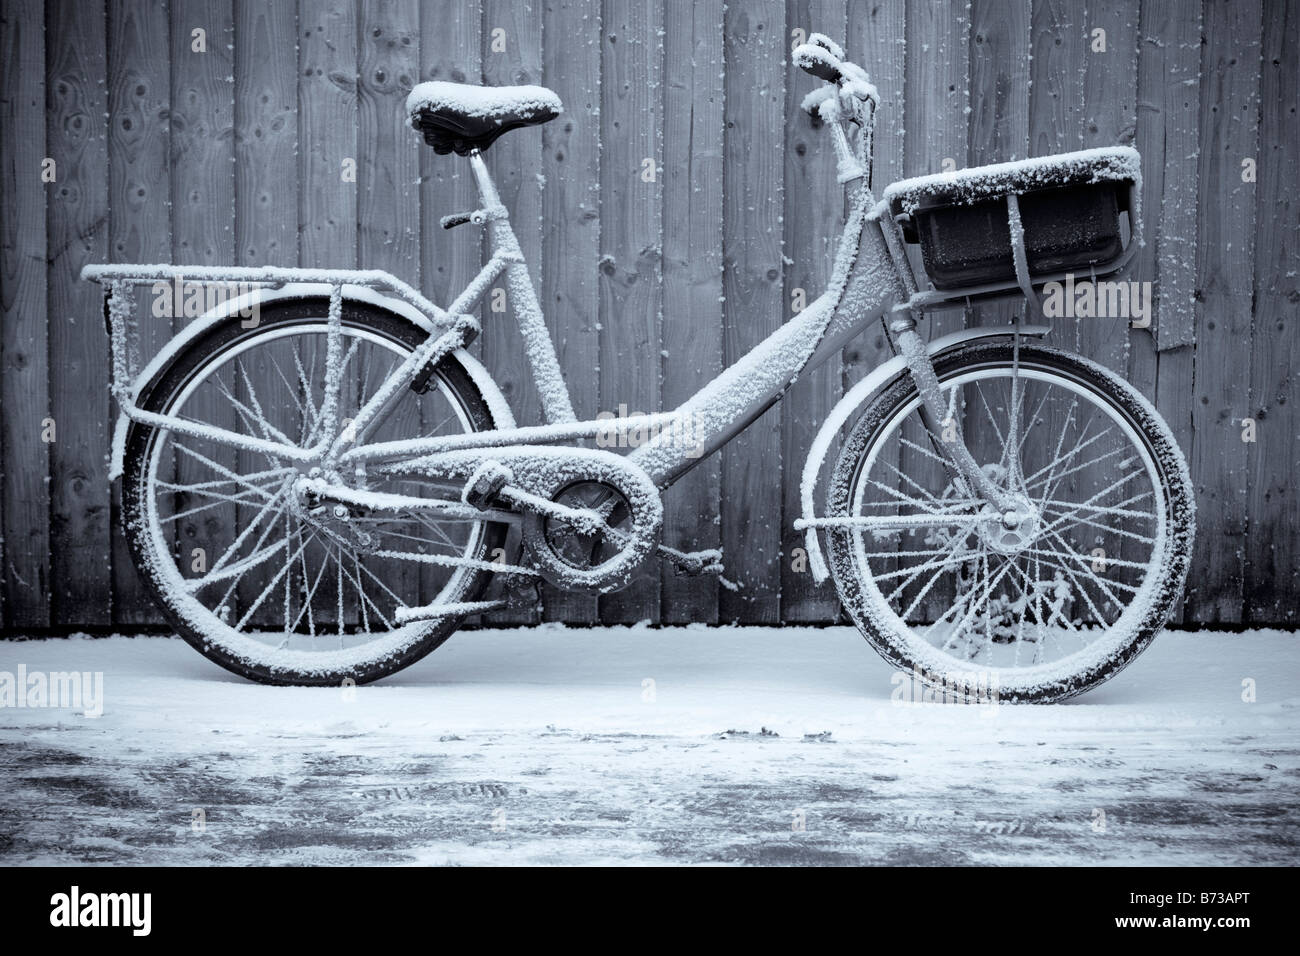 A british royal mail postal delivery bicycle leaning up against a fence on a snowy winters morning. Stock Photo